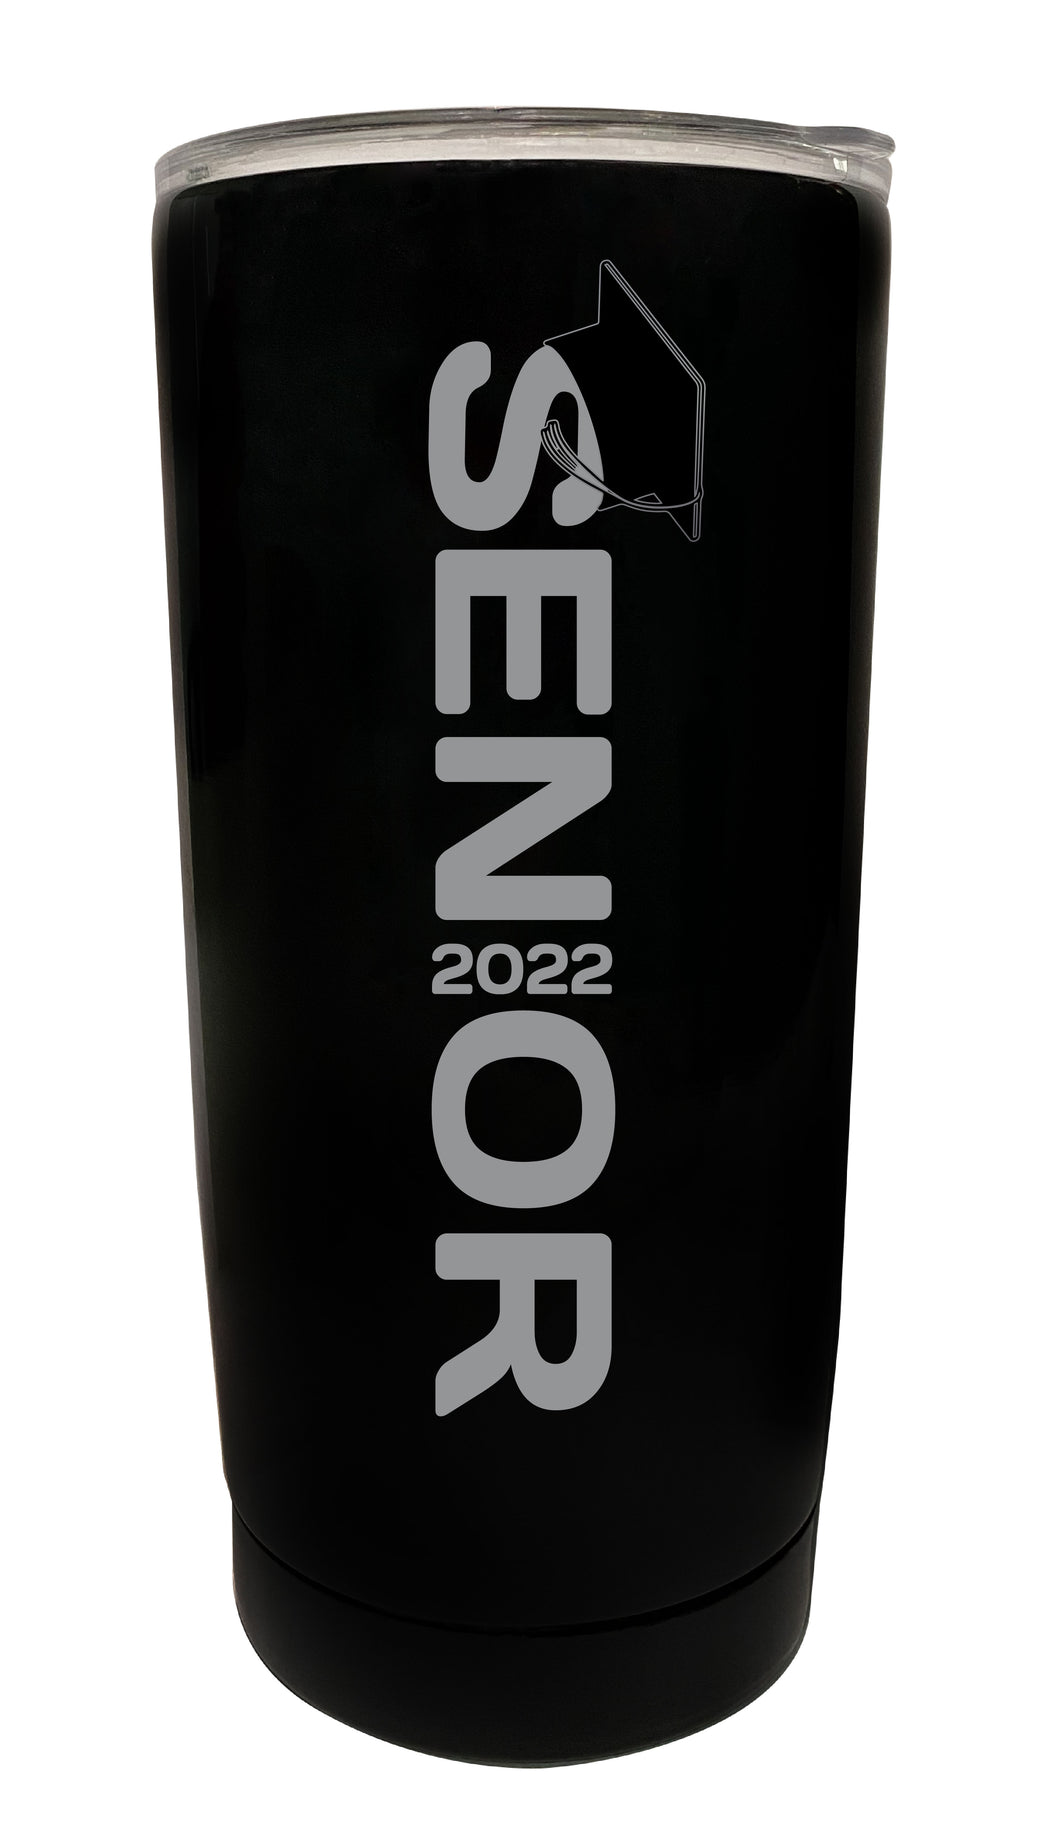 Class of 2022 Graduation 16 oz Engraved Stainless Steel Insulated Tumbler Colors